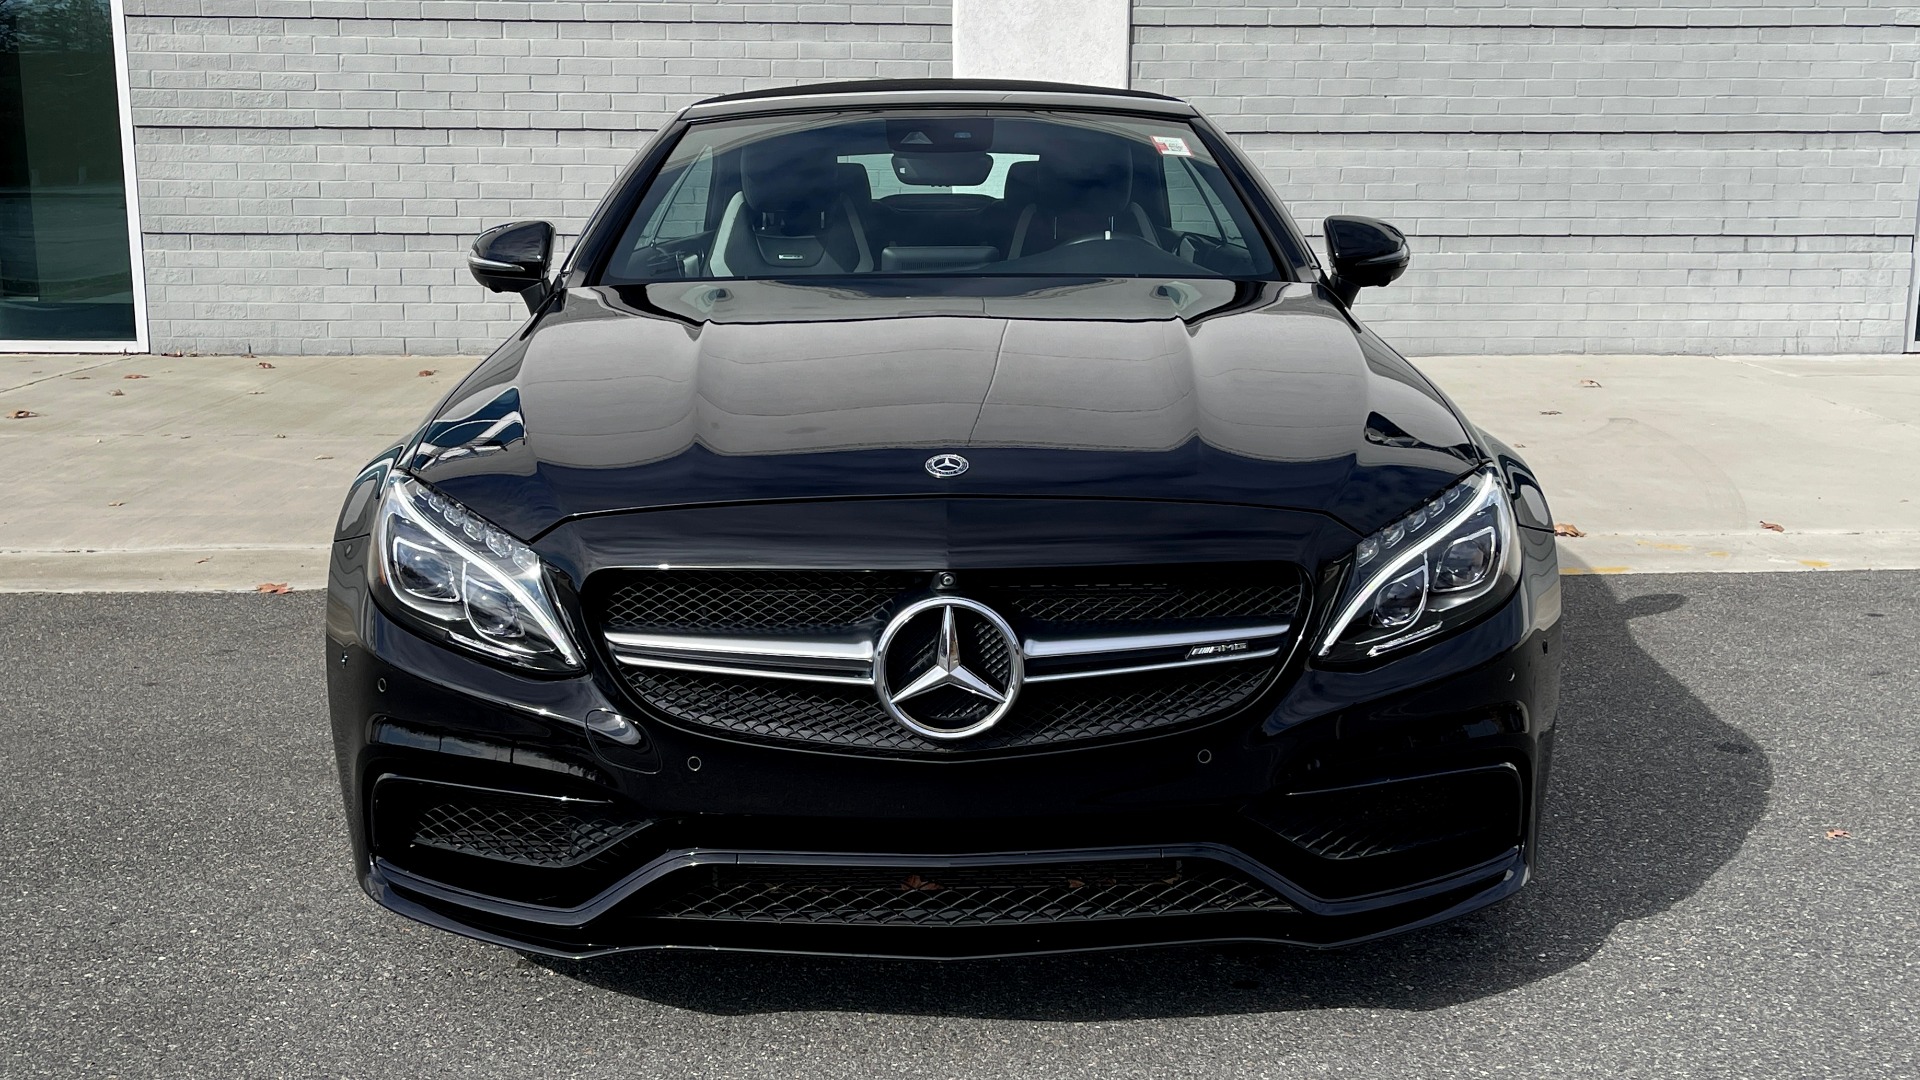 Used 2018 Mercedes-Benz C-CLASS AMG C63 S CABRIOLET / PREM / LIGHTING / MULTIMEDIA / NIGHT PKG for sale $84,000 at Formula Imports in Charlotte NC 28227 9